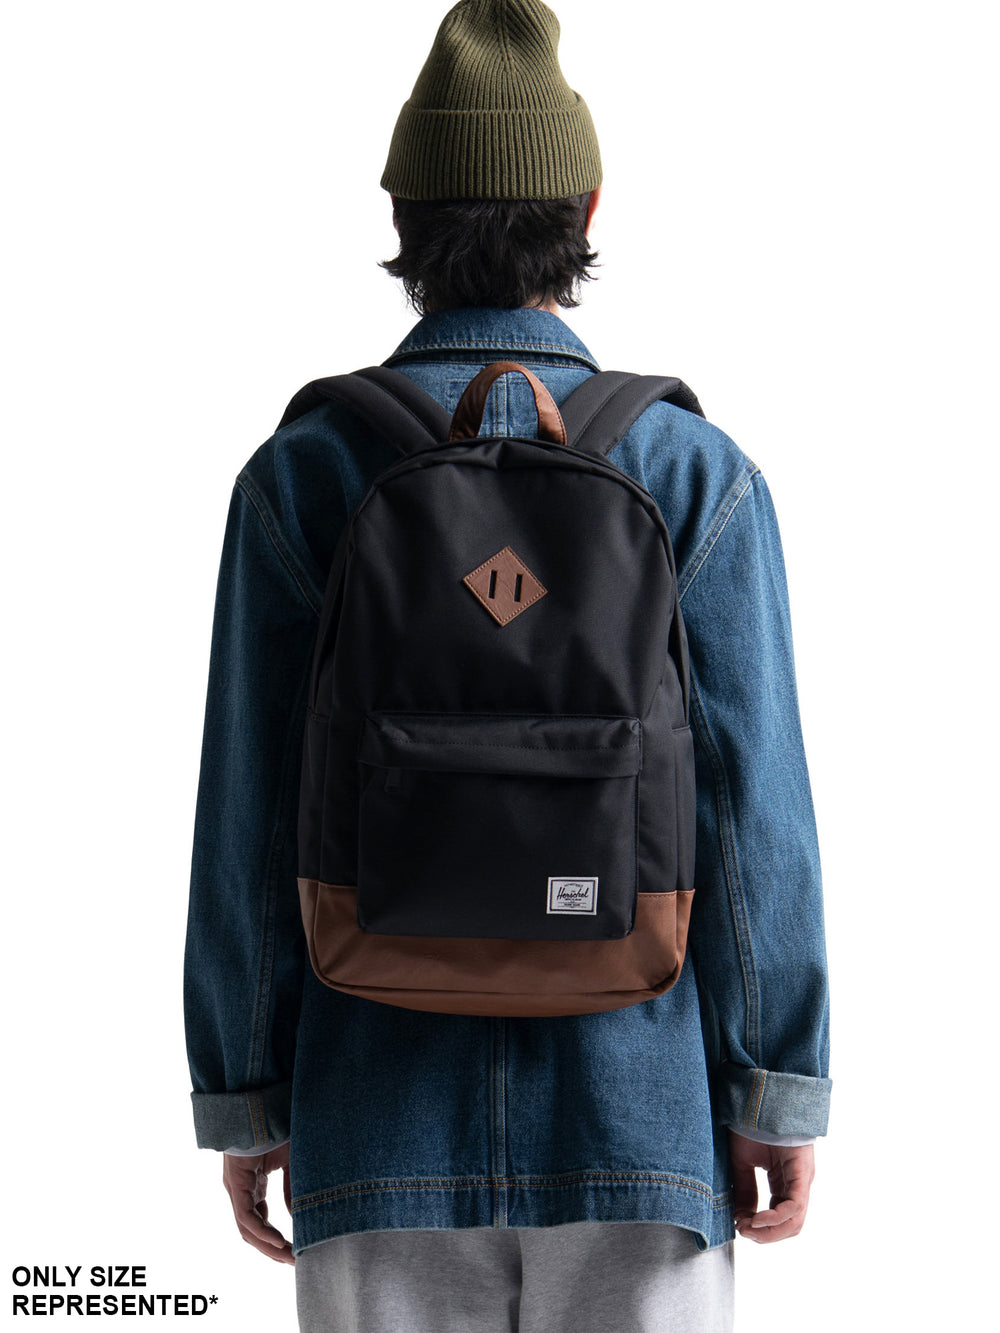 HERSCHEL SUPPLY CO. HERITAGE 21.5L BACKPACK - RAVEN X - CLEARANCE